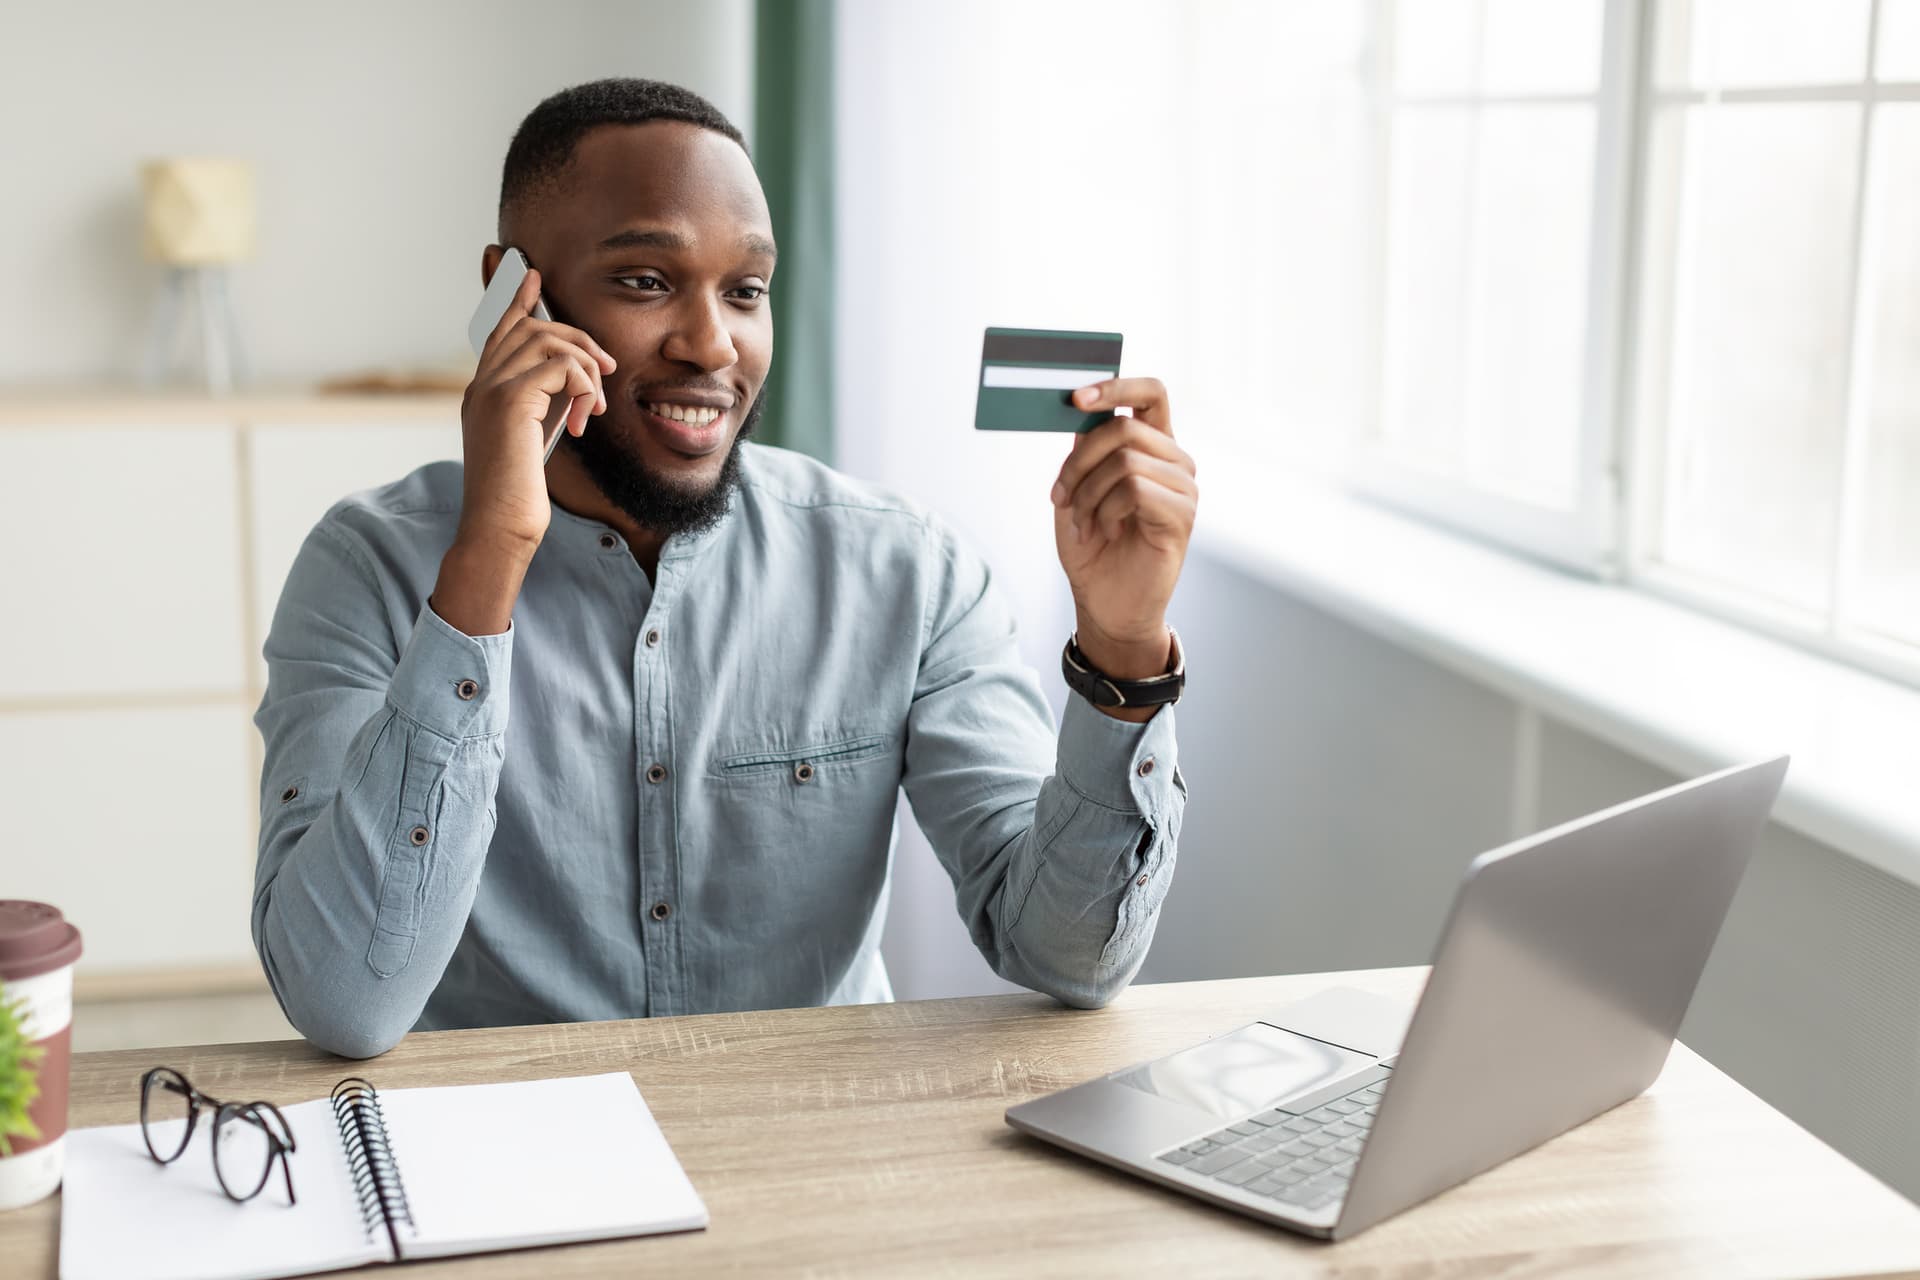 Happy African American Businessman Holding Credit Card Talking On Phone Sitting At Workplace In Modern Office. Banking Assistance Service And E-Commerce Concept